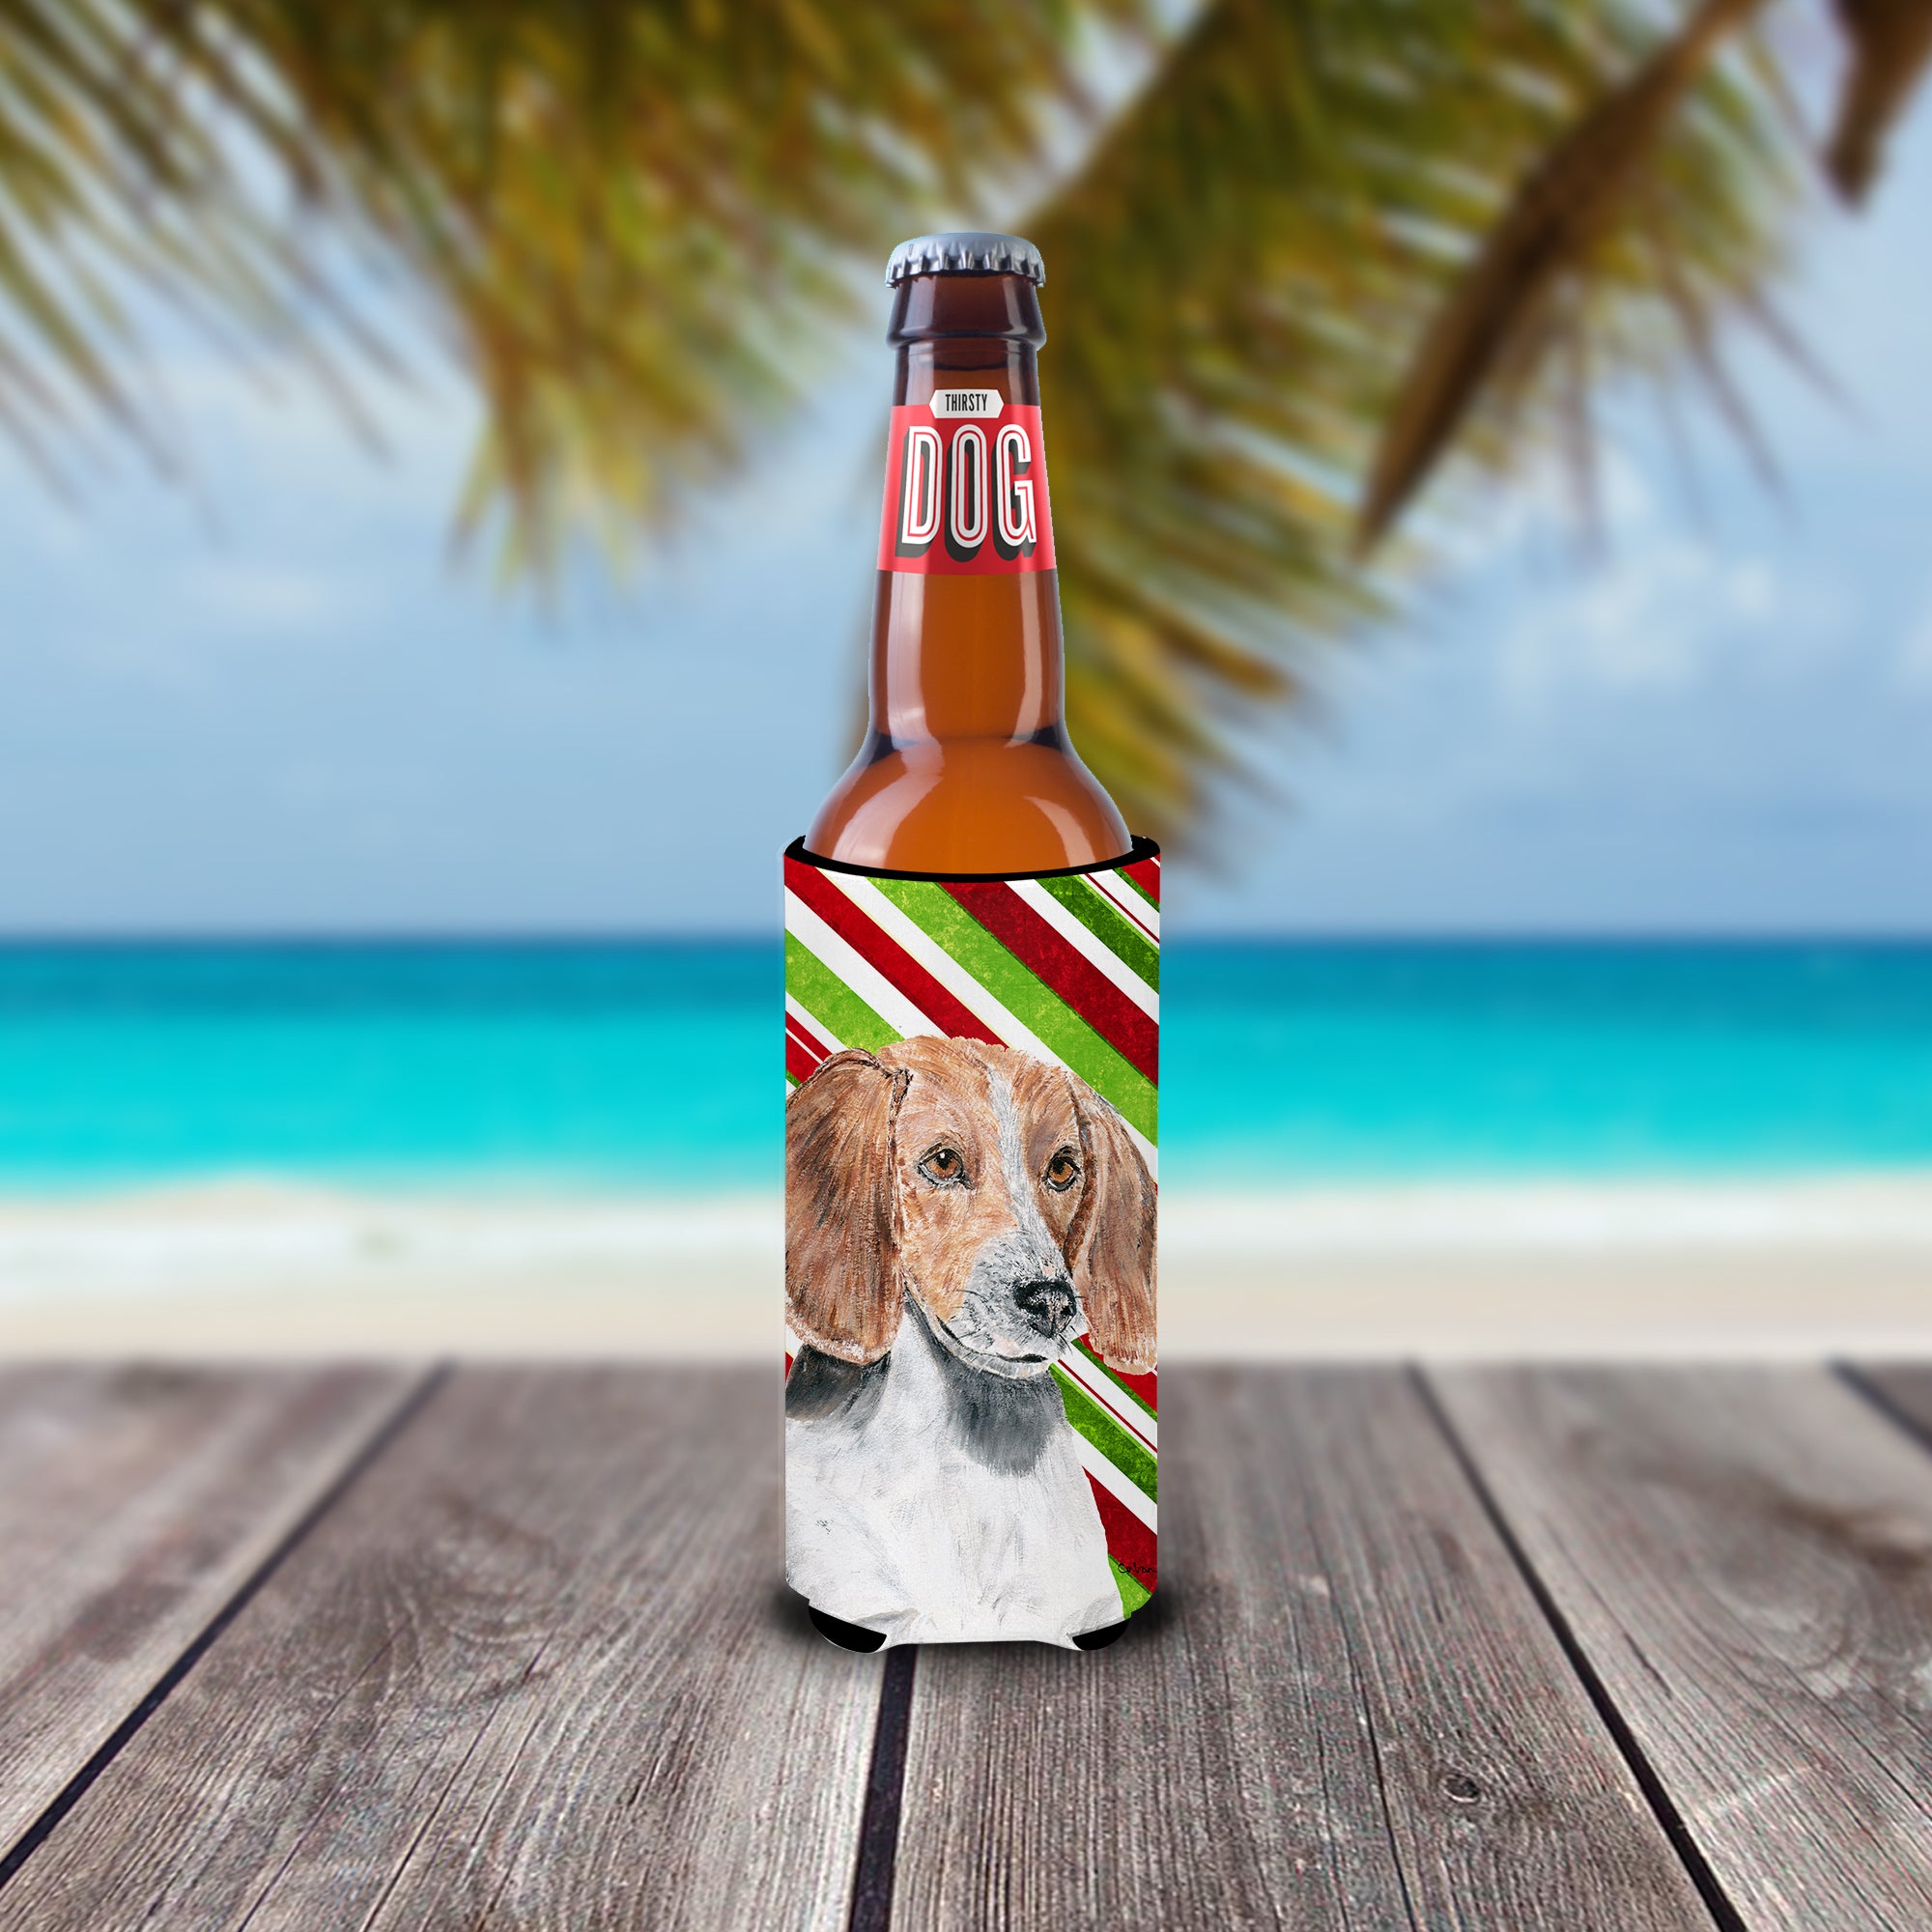 English Foxhound Candy Cane Christmas Ultra Beverage Insulators for slim cans.